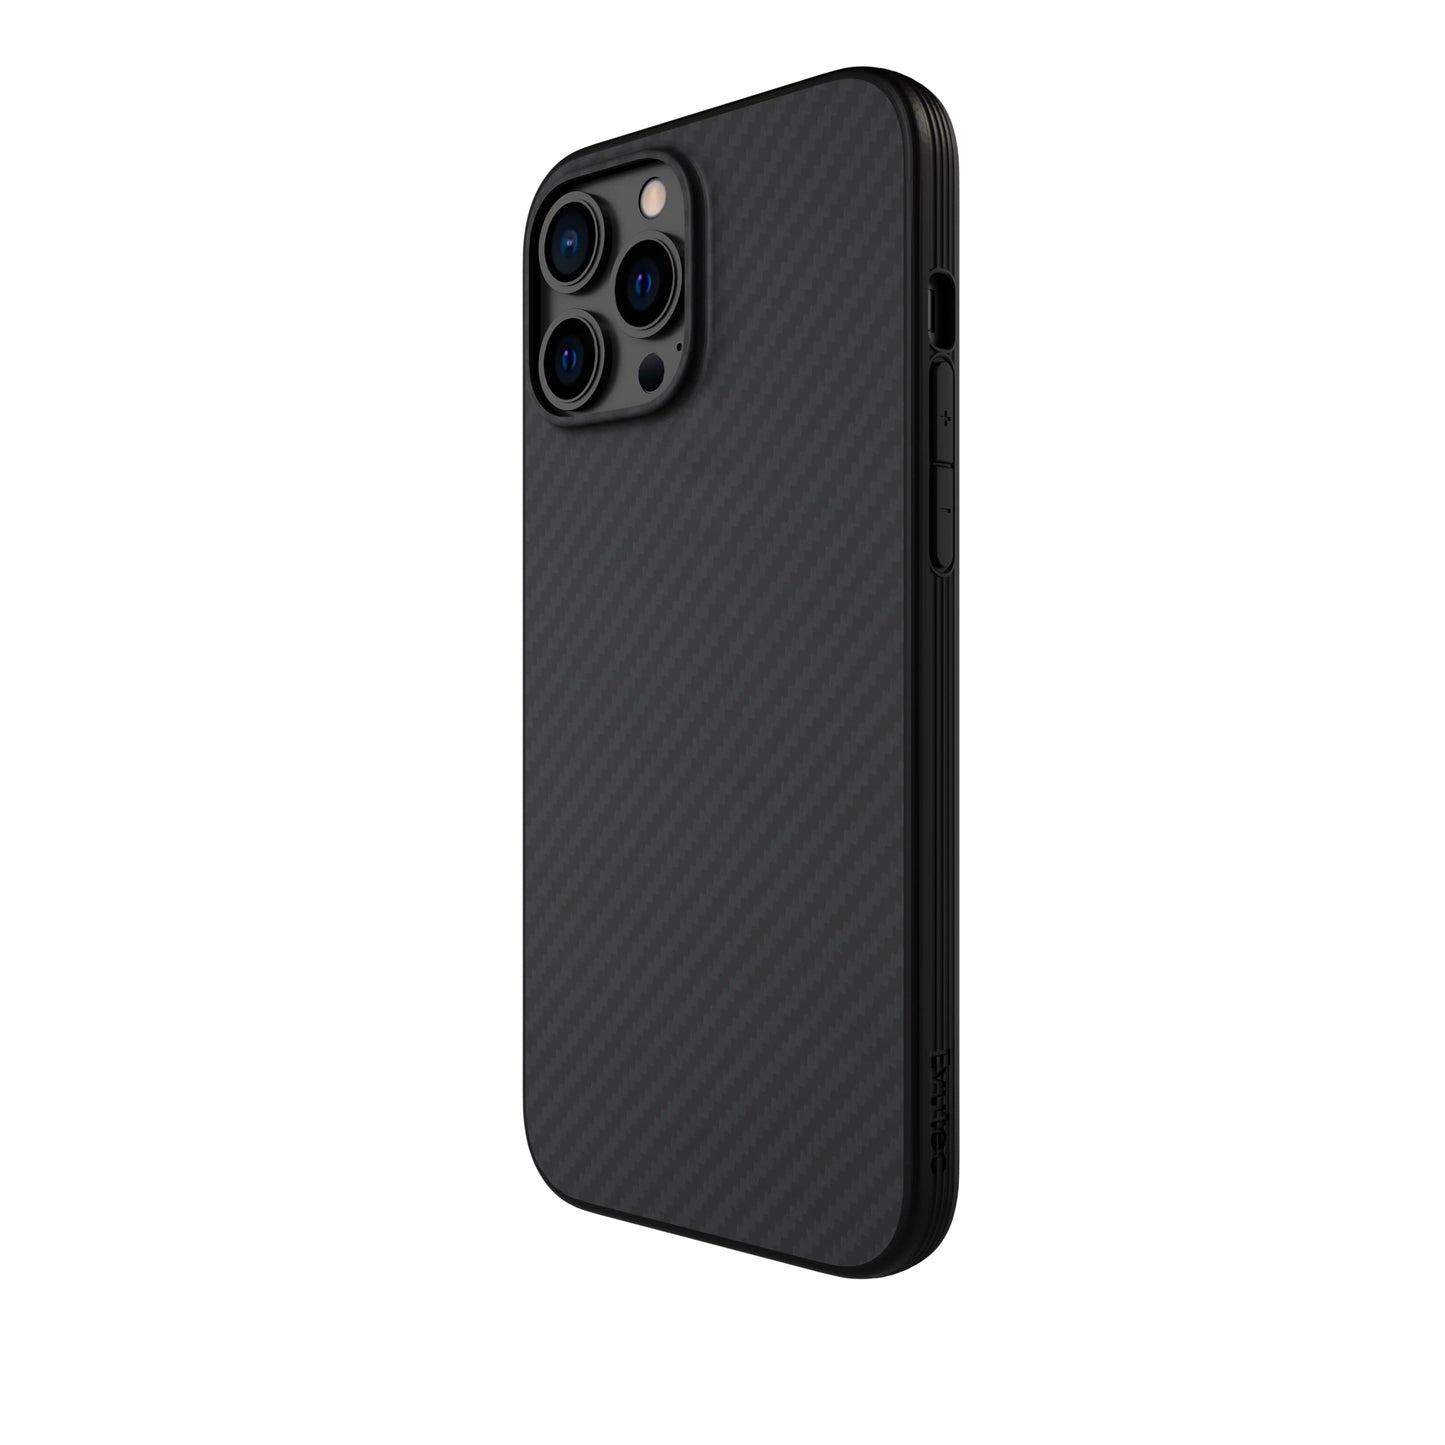 Evutec Compatible with iPhone 13 Pro Max Case, Aramid Fiber iPhone 13 Pro Max Cases Cover for iPhone 13 Pro Max 6.7 Inch, Unique Hard & Smooth Phone Case with AFIX+ Free Vent Mount